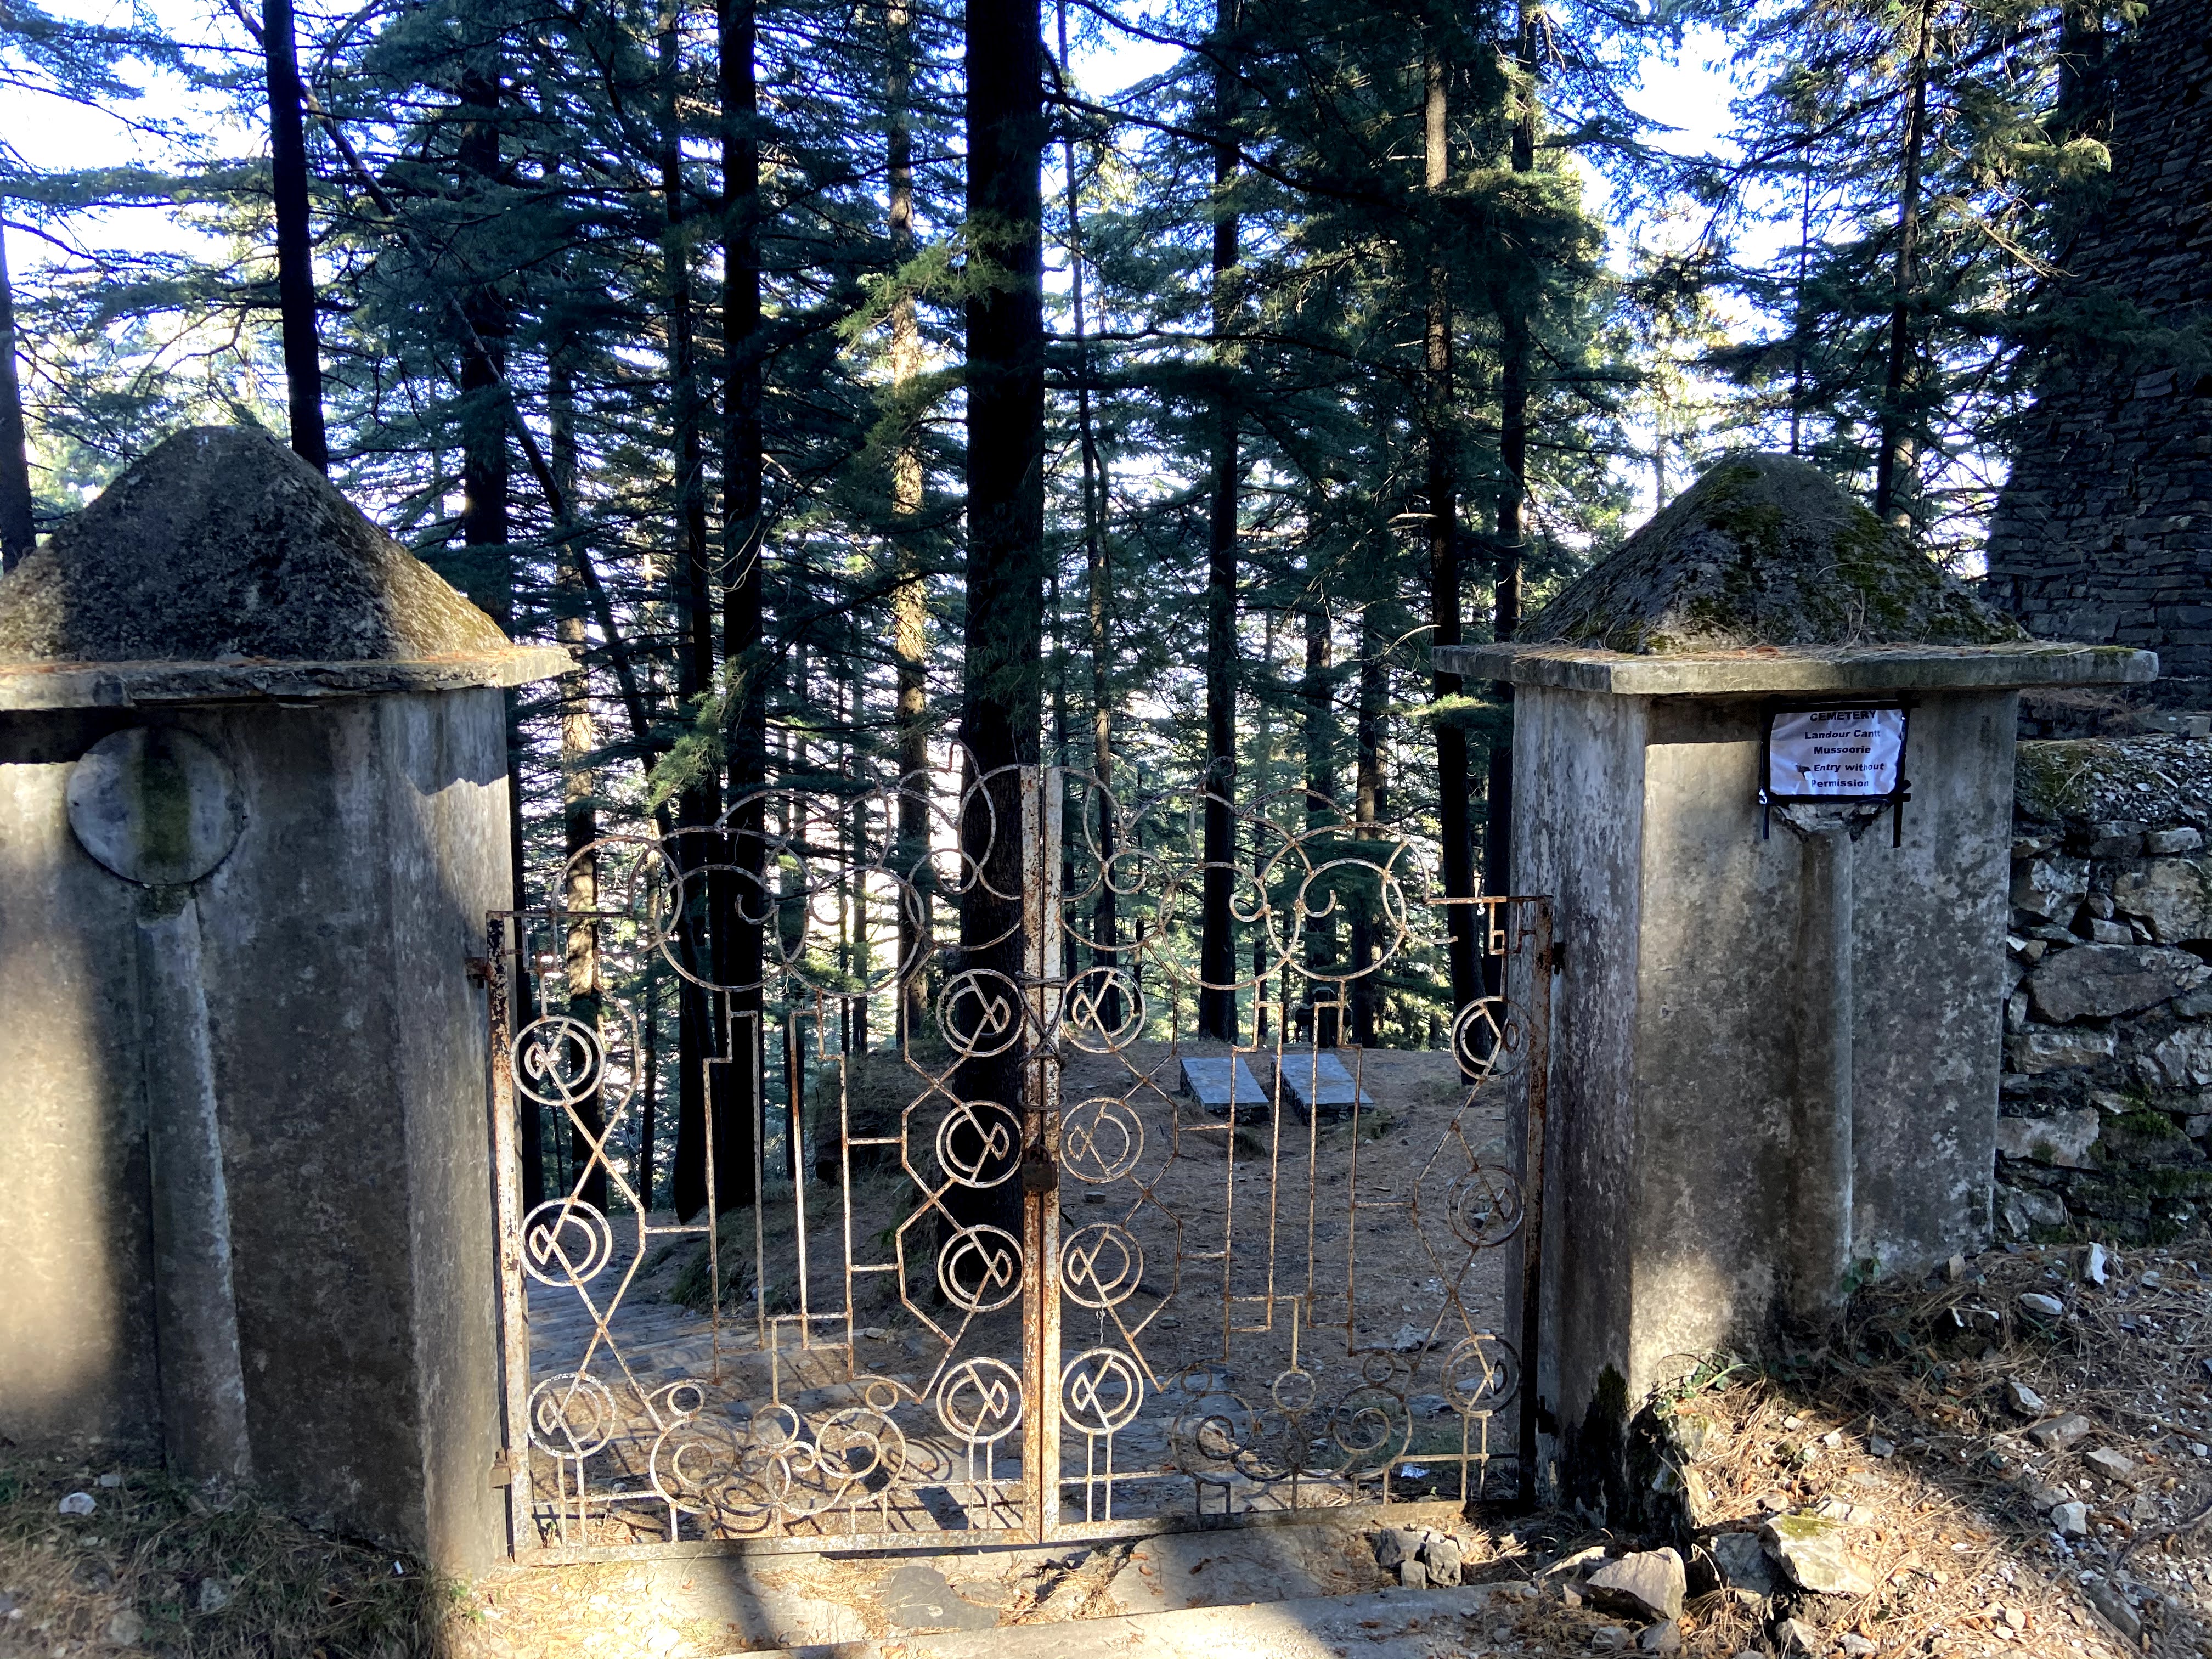 Locked Gates of the cemetary